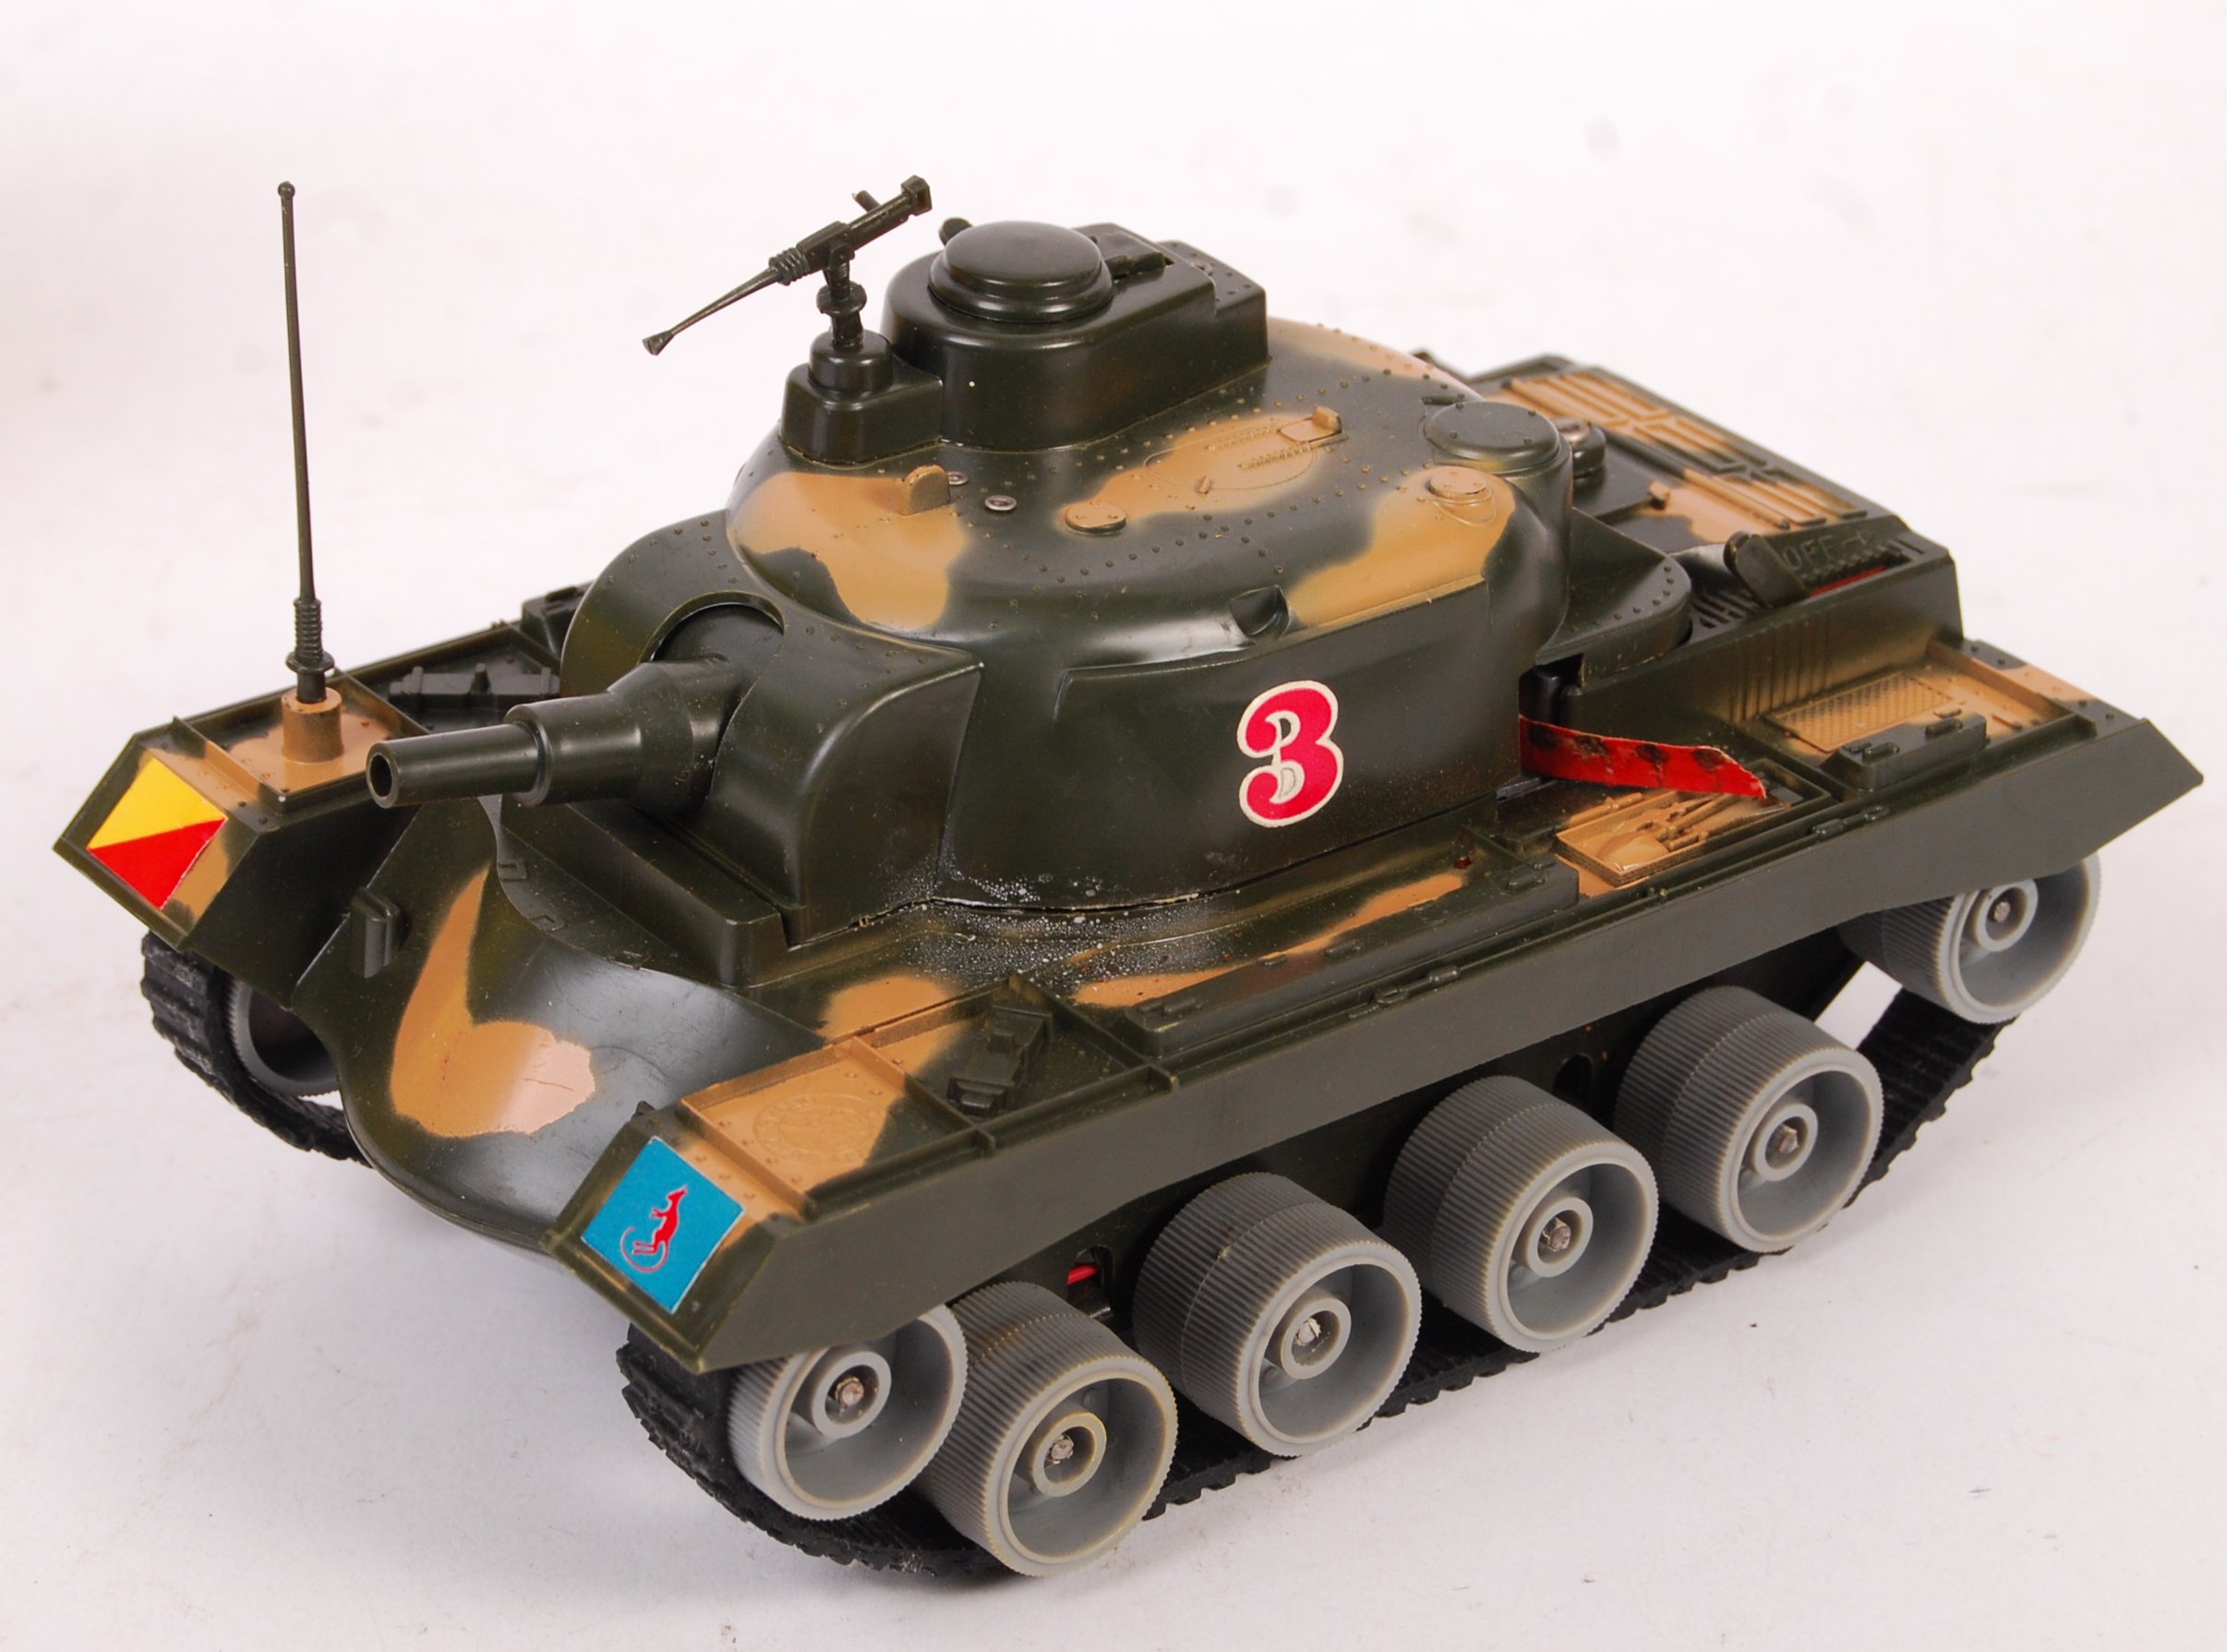 VINTAGE MARX TOYS ' CAP FIRING TANK ' BATTERY OPERATED TOY - Image 2 of 5